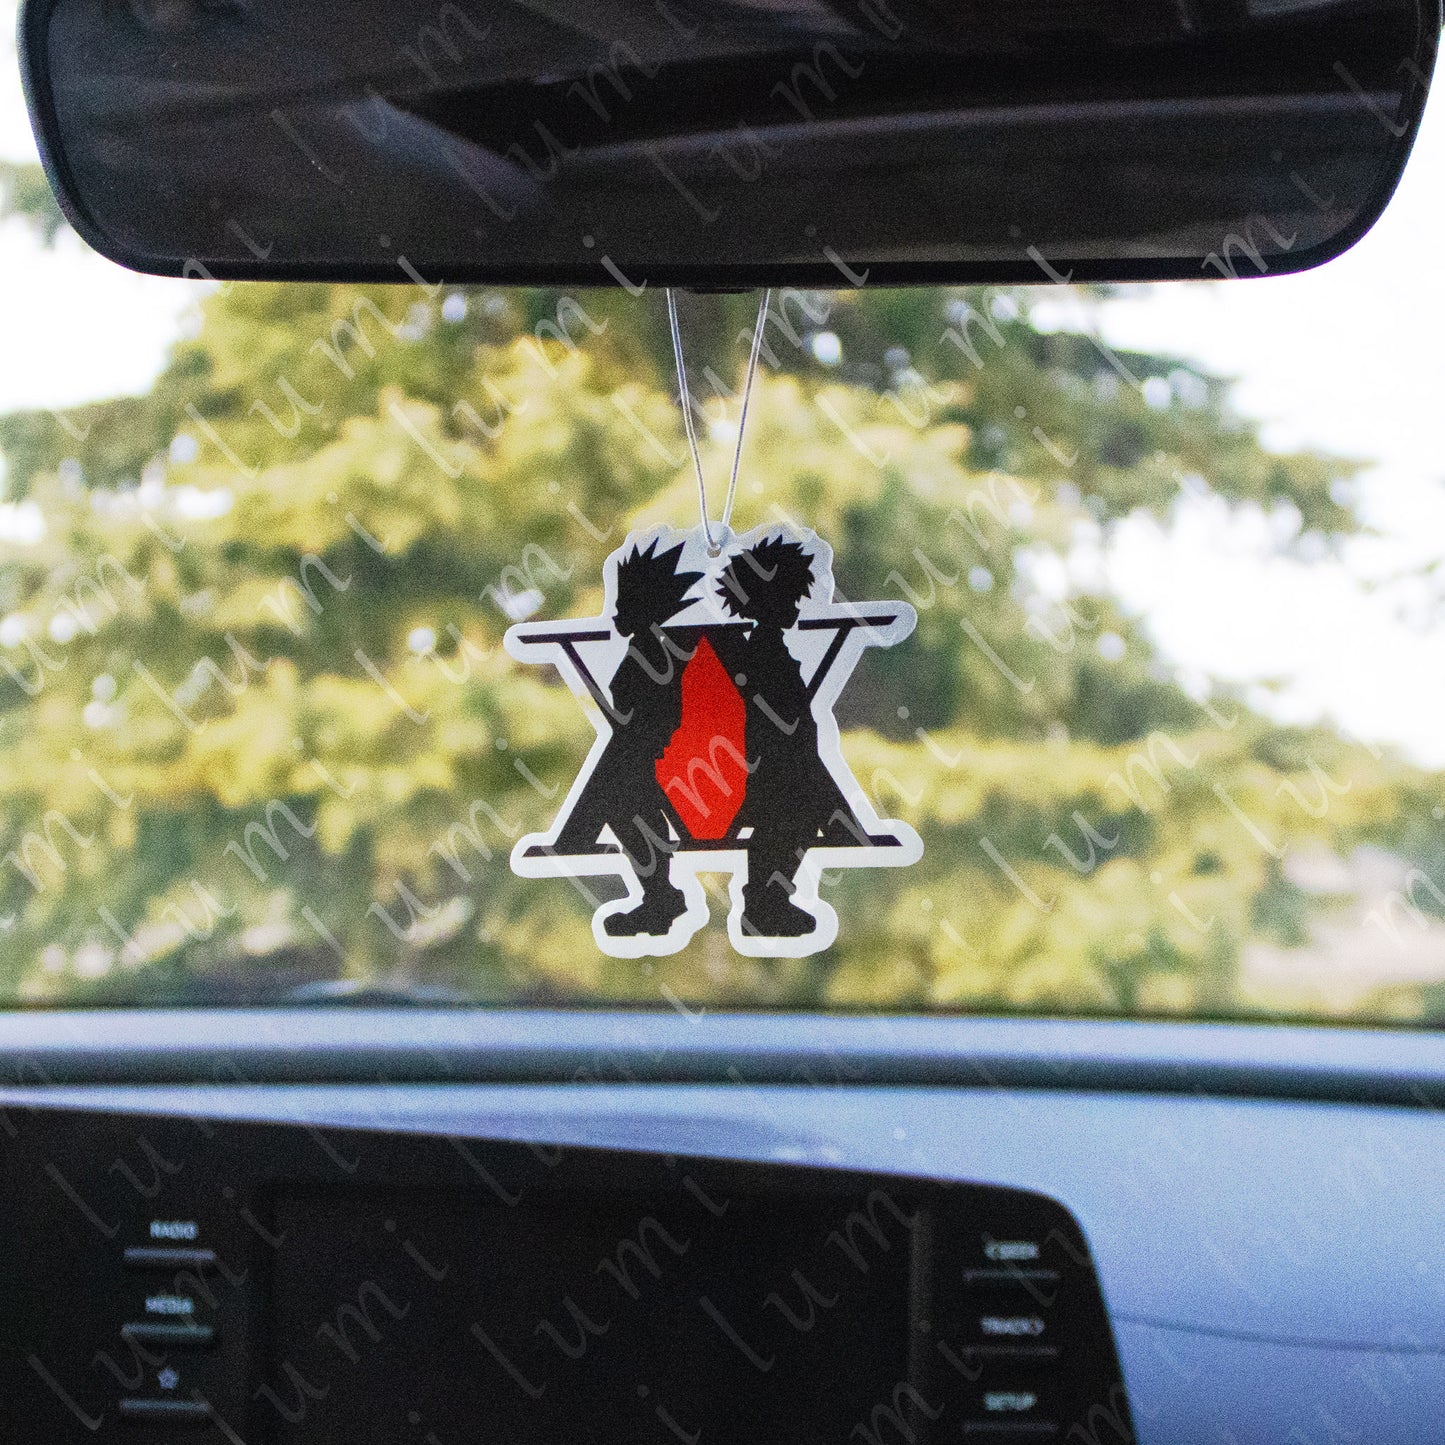 An image of a rectangular air freshener featuring Gon and Killua from the anime series Hunter x Hunter. The characters are depicted in a colorful and cartoonish style, with Gon on the left and Killua on the right. The air freshener appears to be hanging from a string